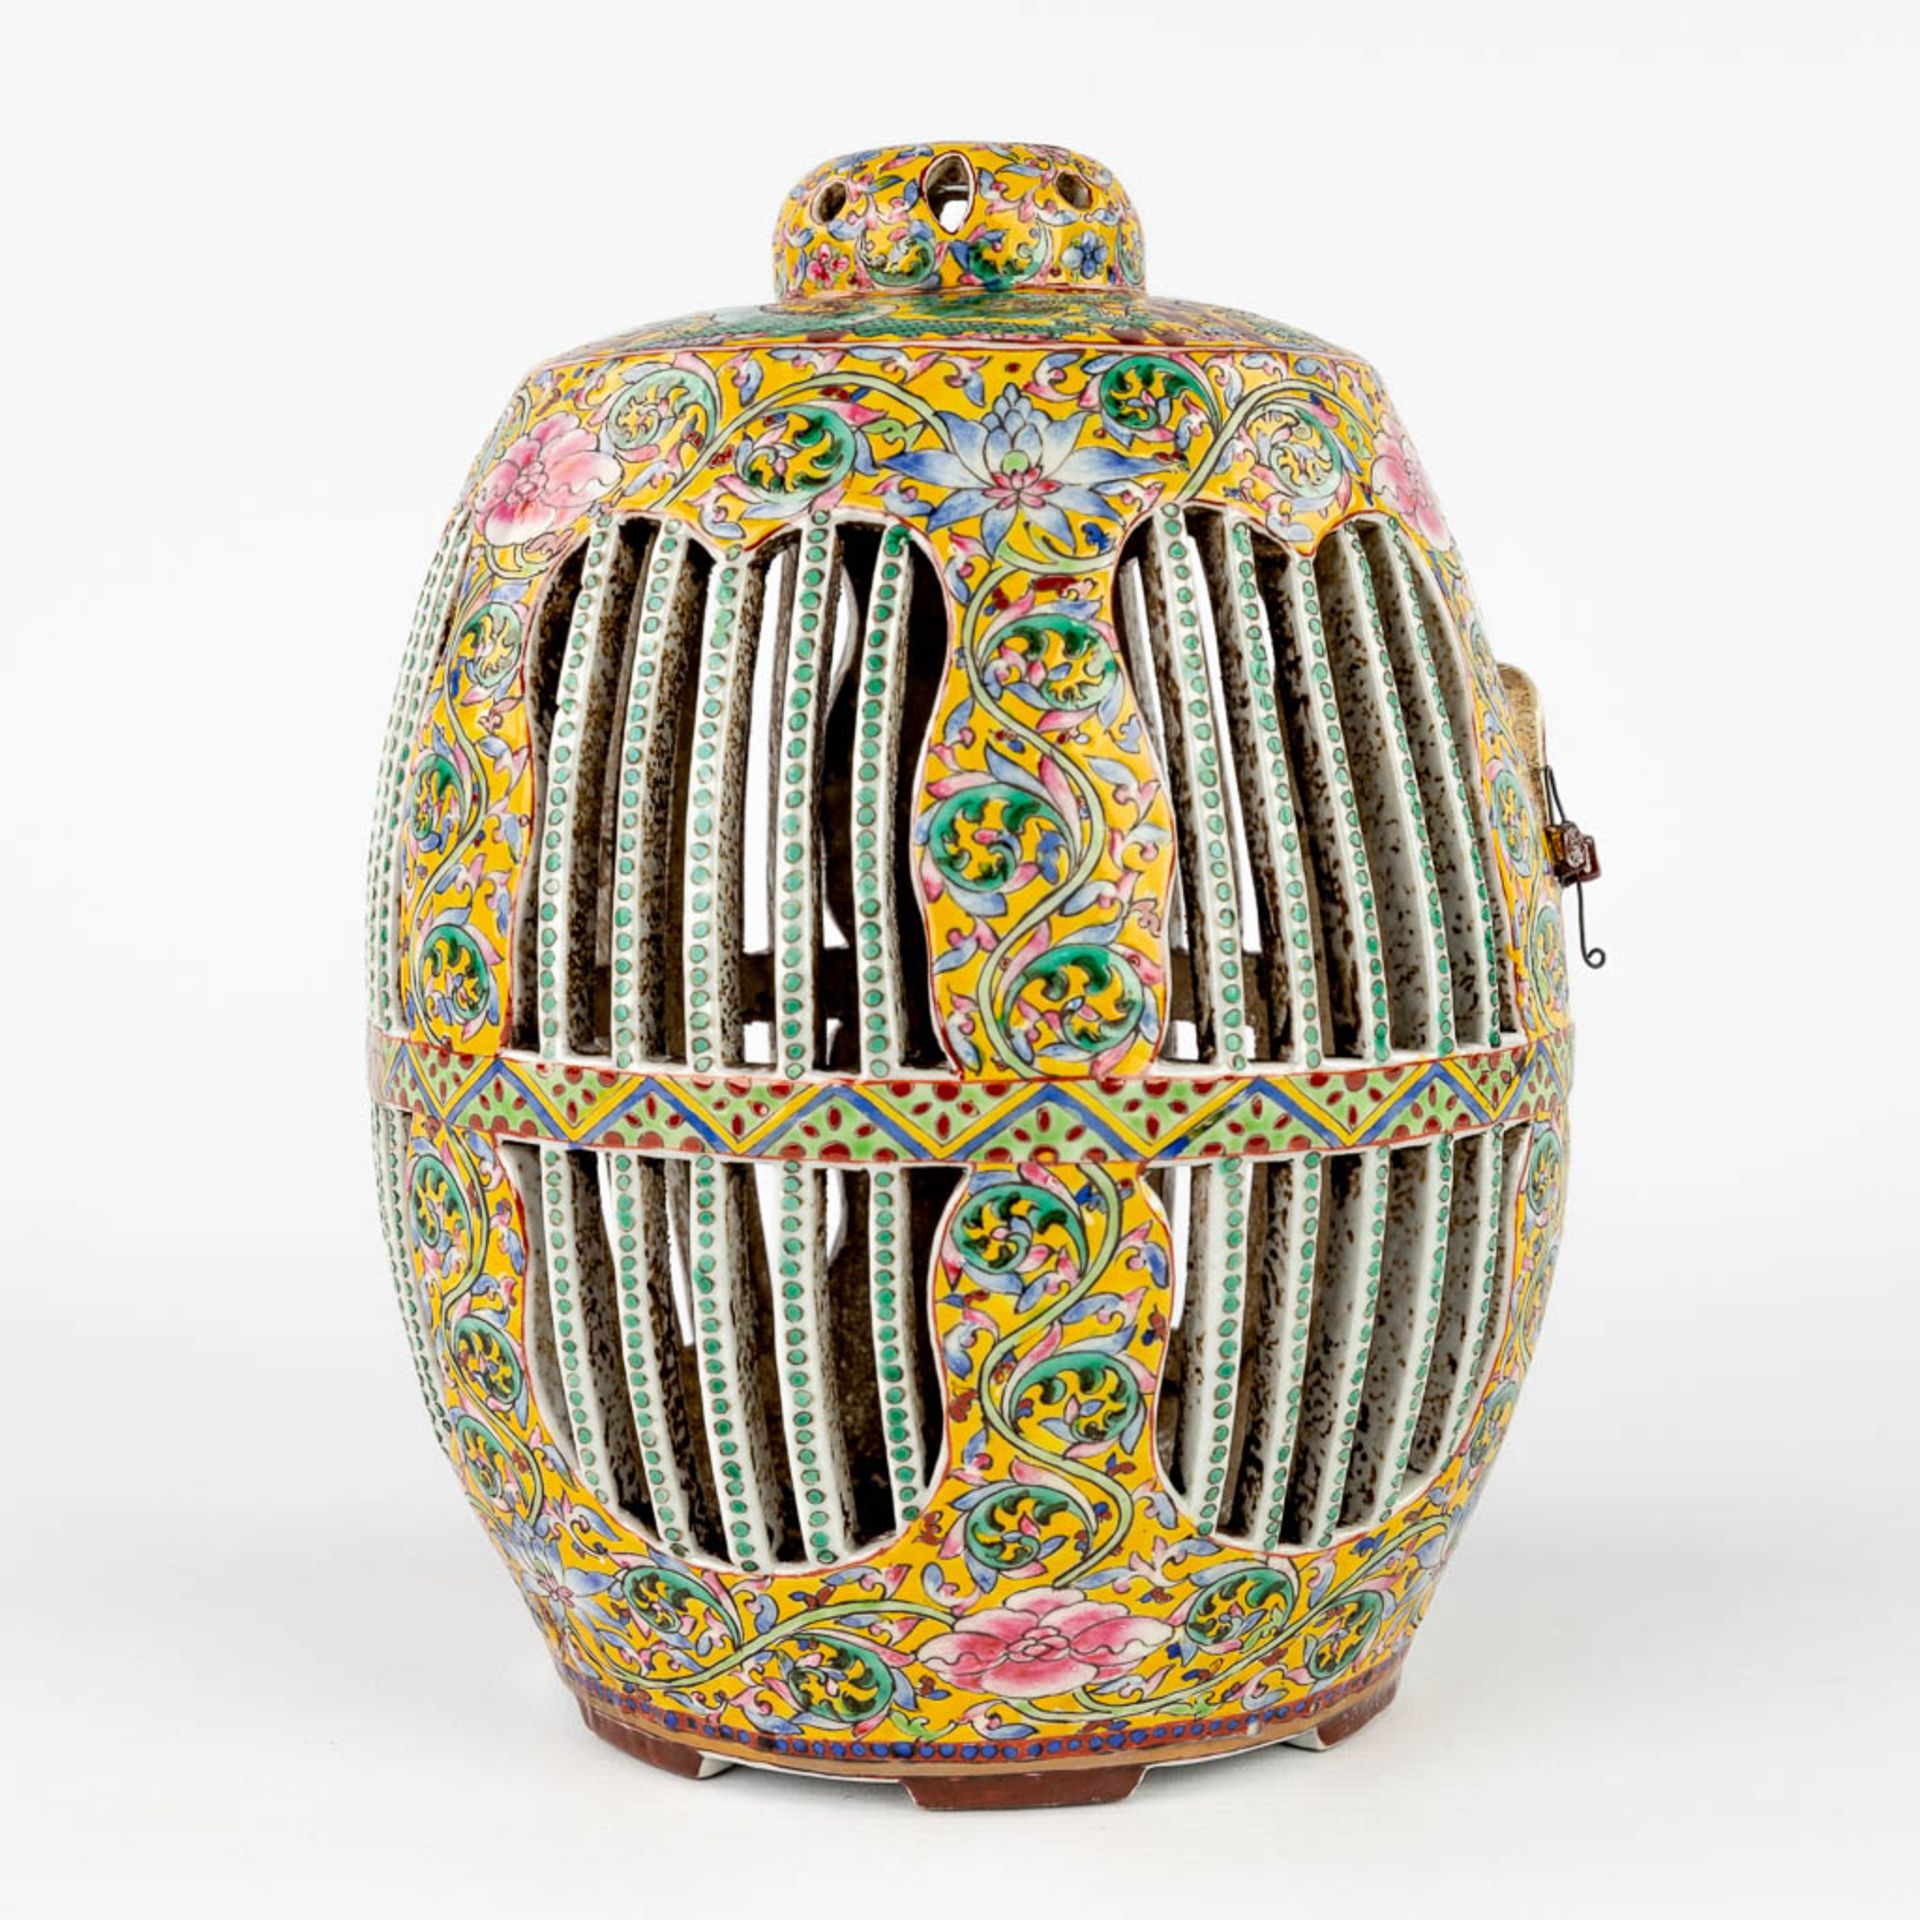 A Chinese porcelain 'Bird Cage', Famille Rose, Qianlong Mark. 20th C. (H:25 x D:19 cm) - Image 5 of 12